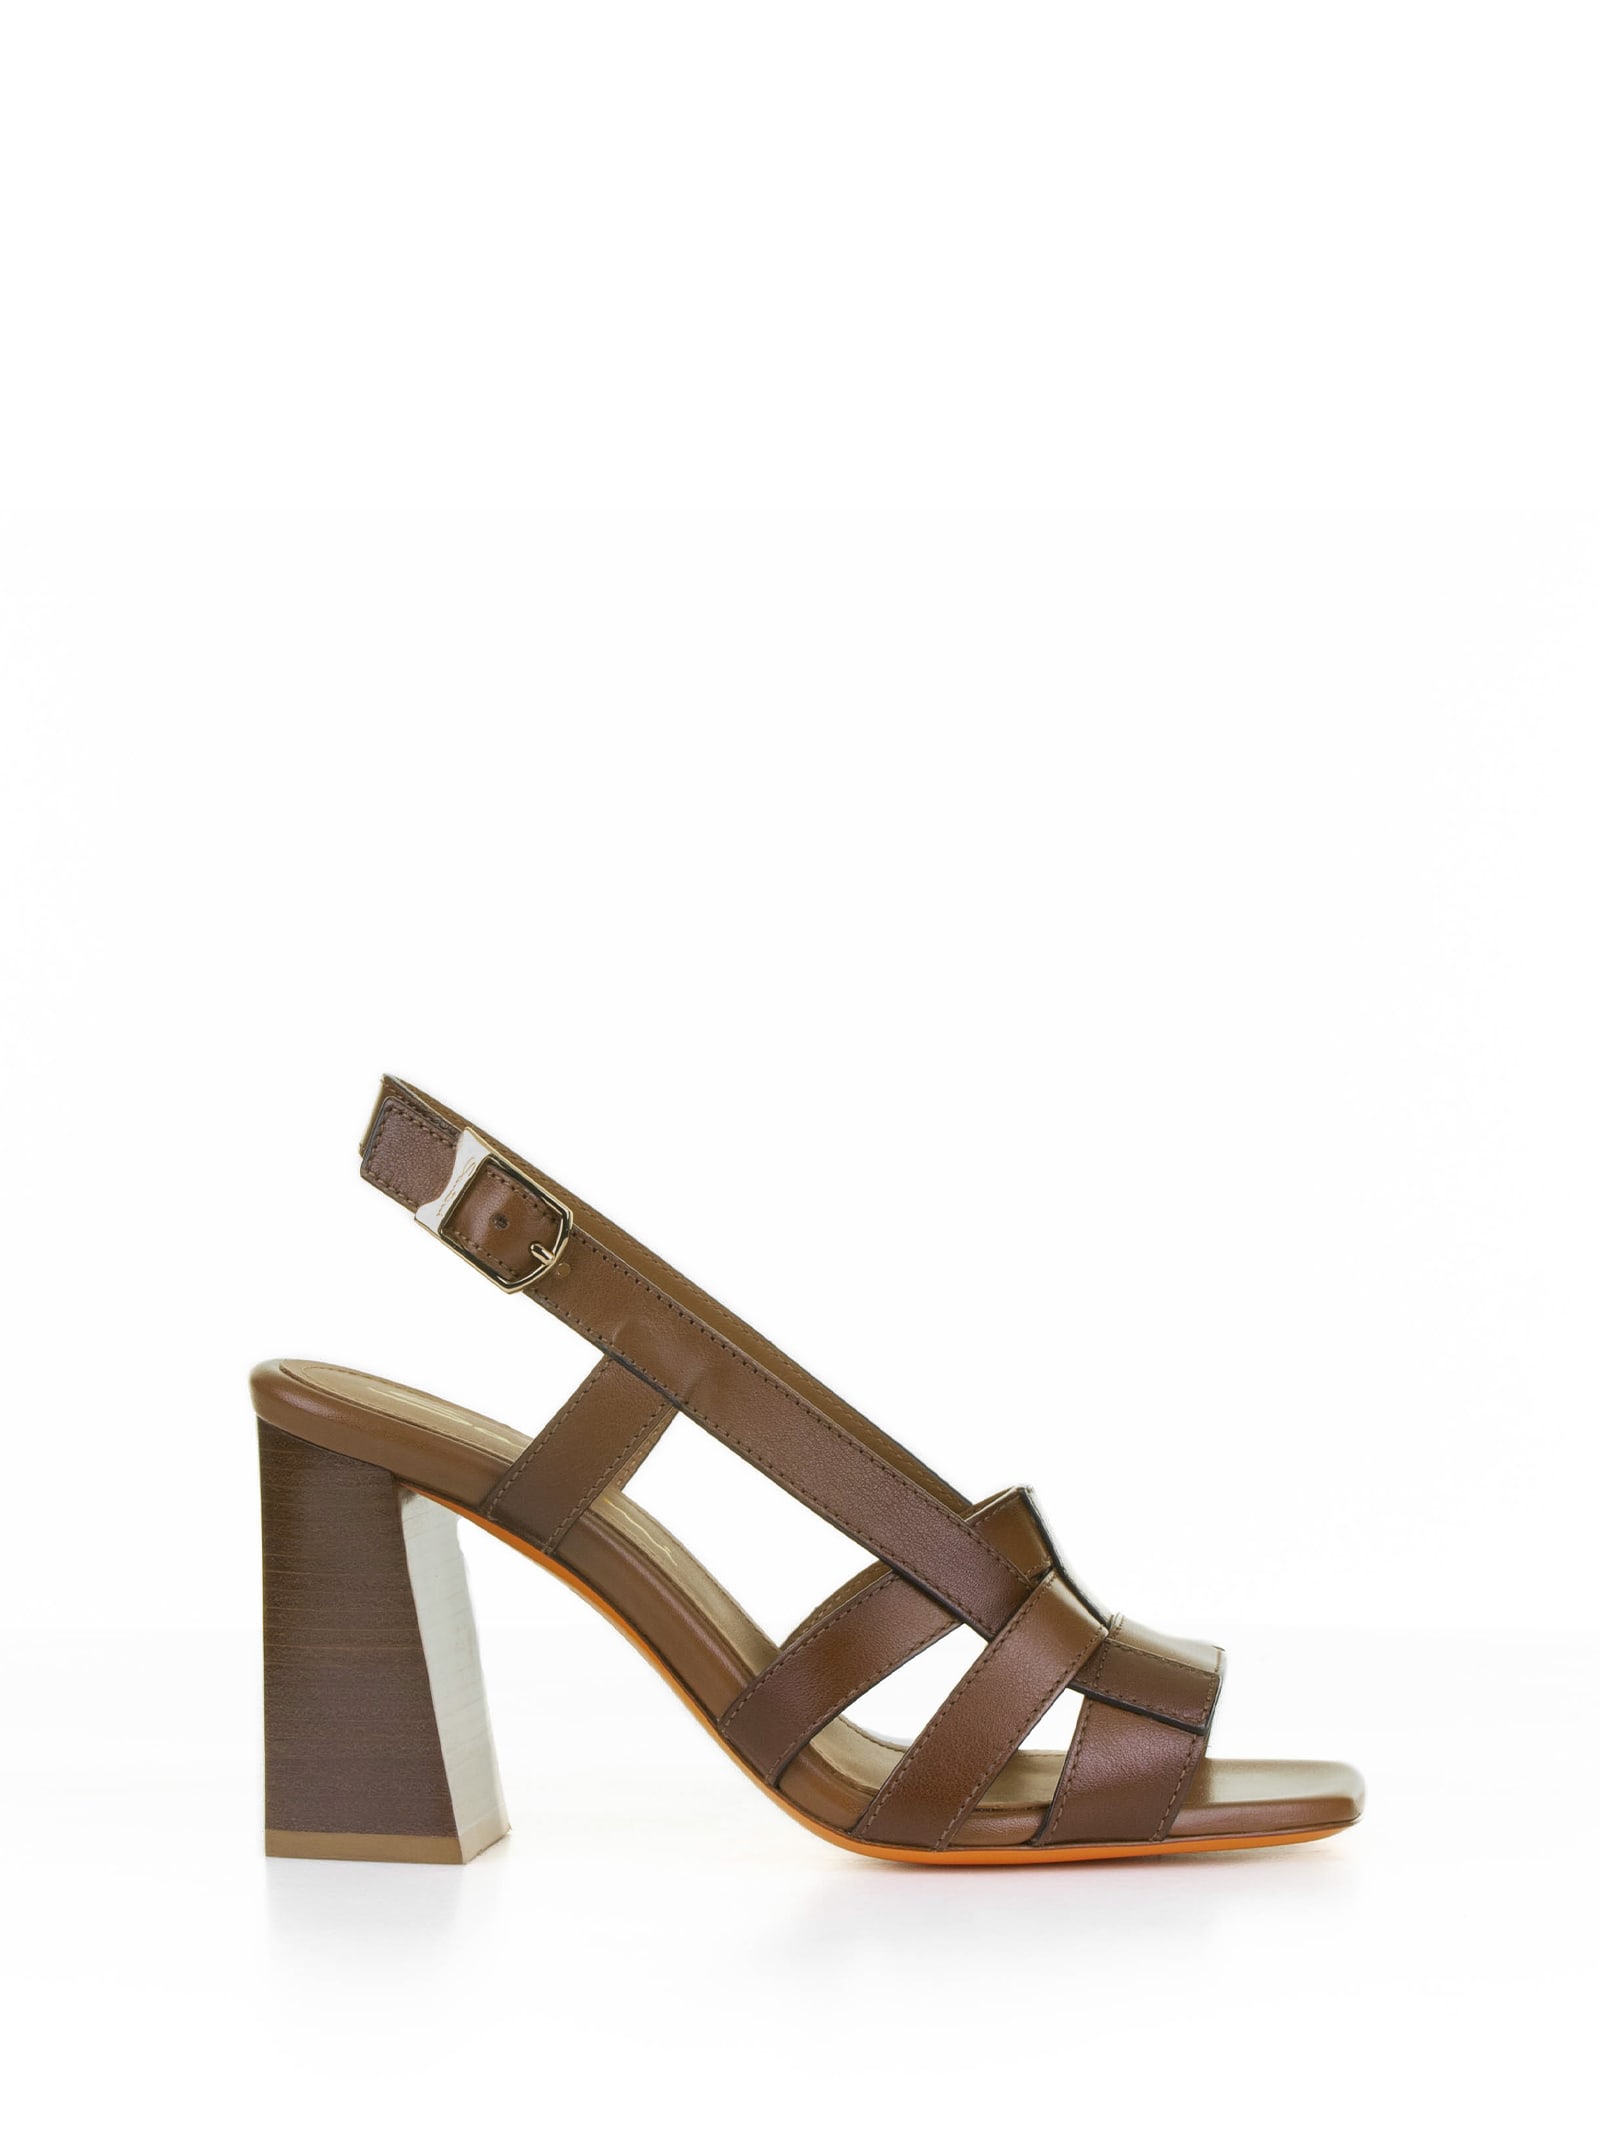 Brown Leather Sandal With Heel